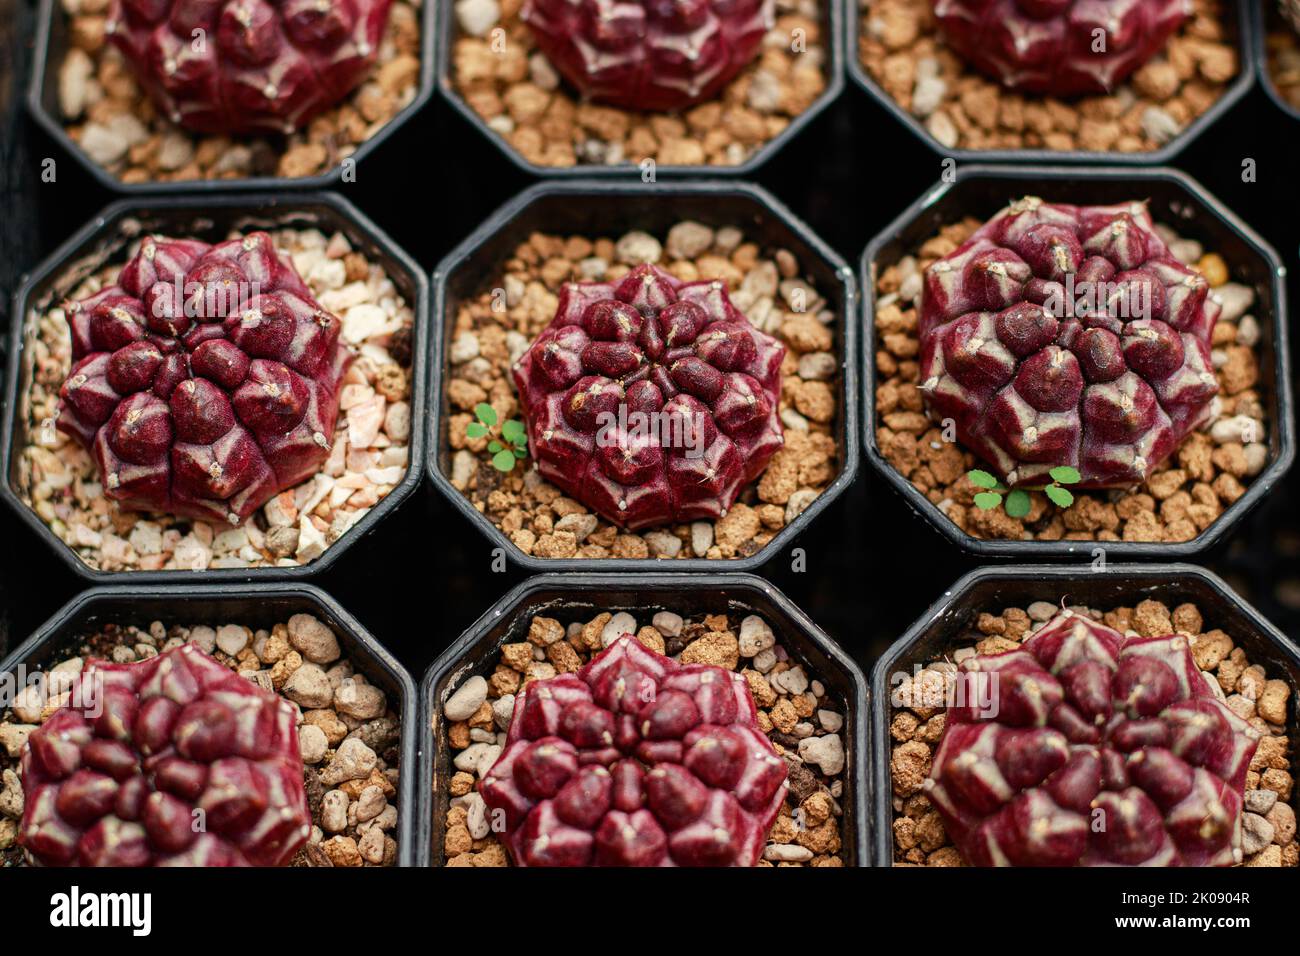 Rows of Eriosyce occulta seedlings propagated in small pots at a plant shop Stock Photo